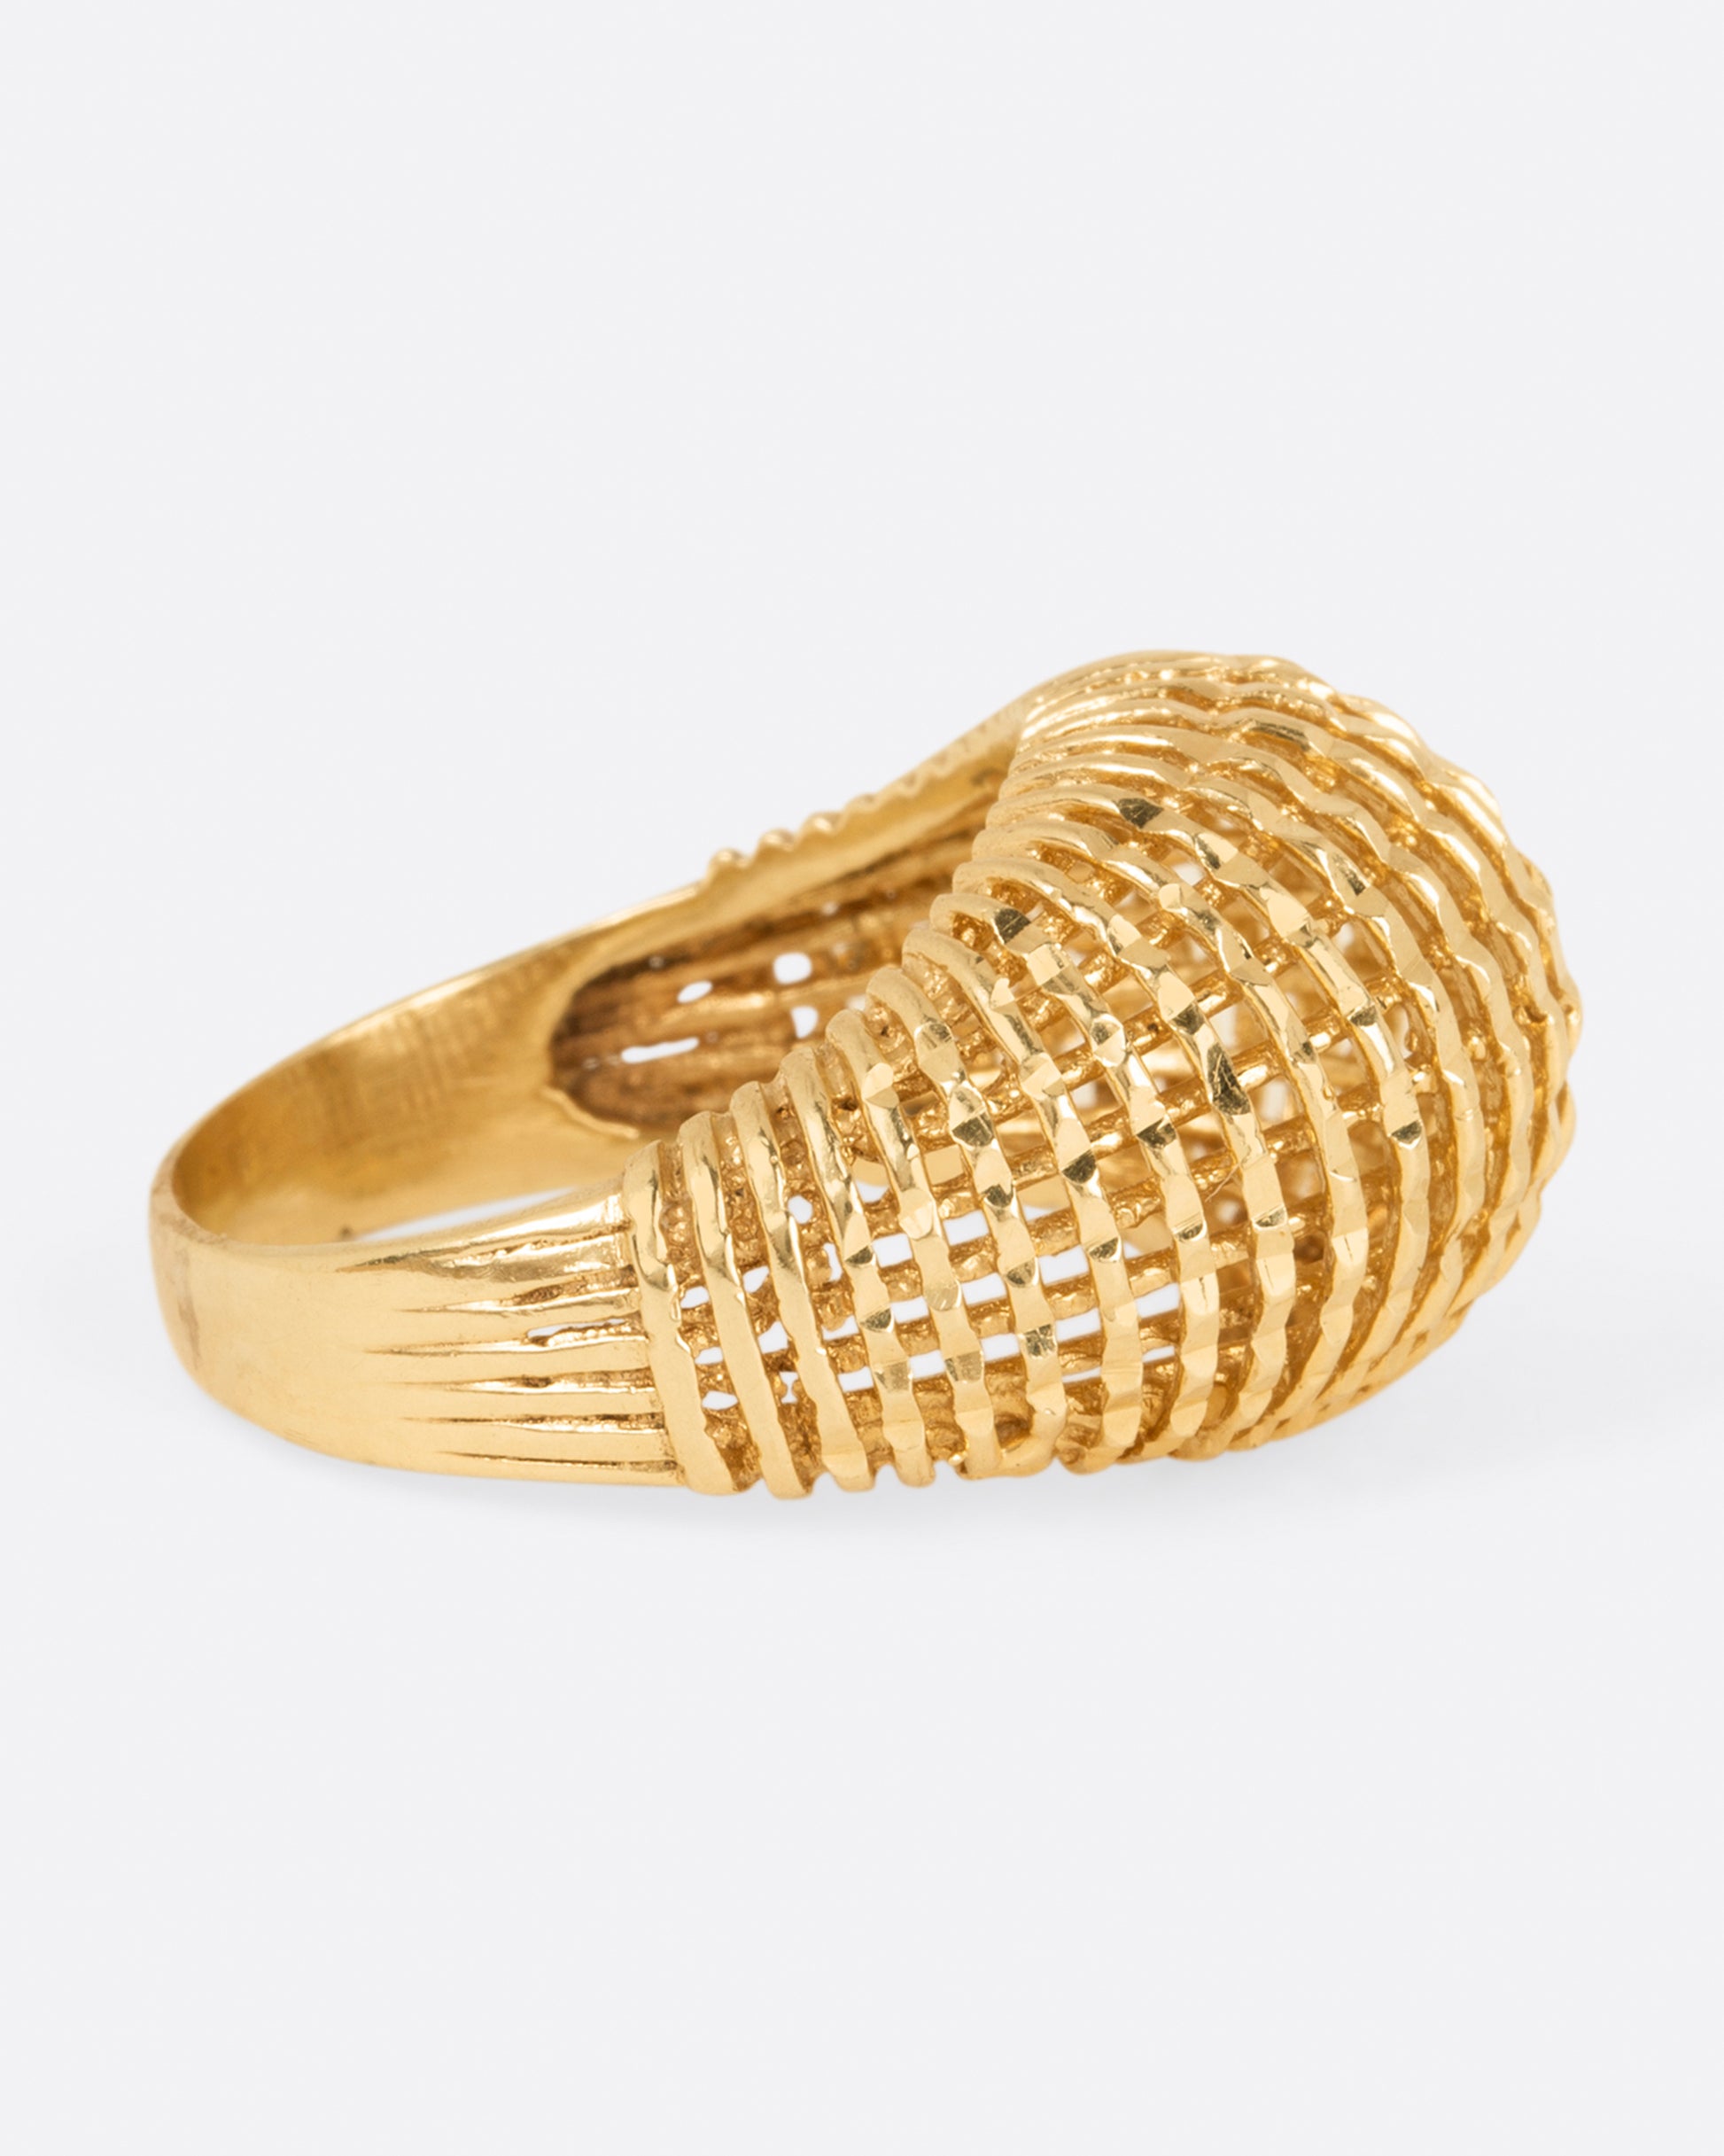 A woven yellow gold dome ring, shown from the side.